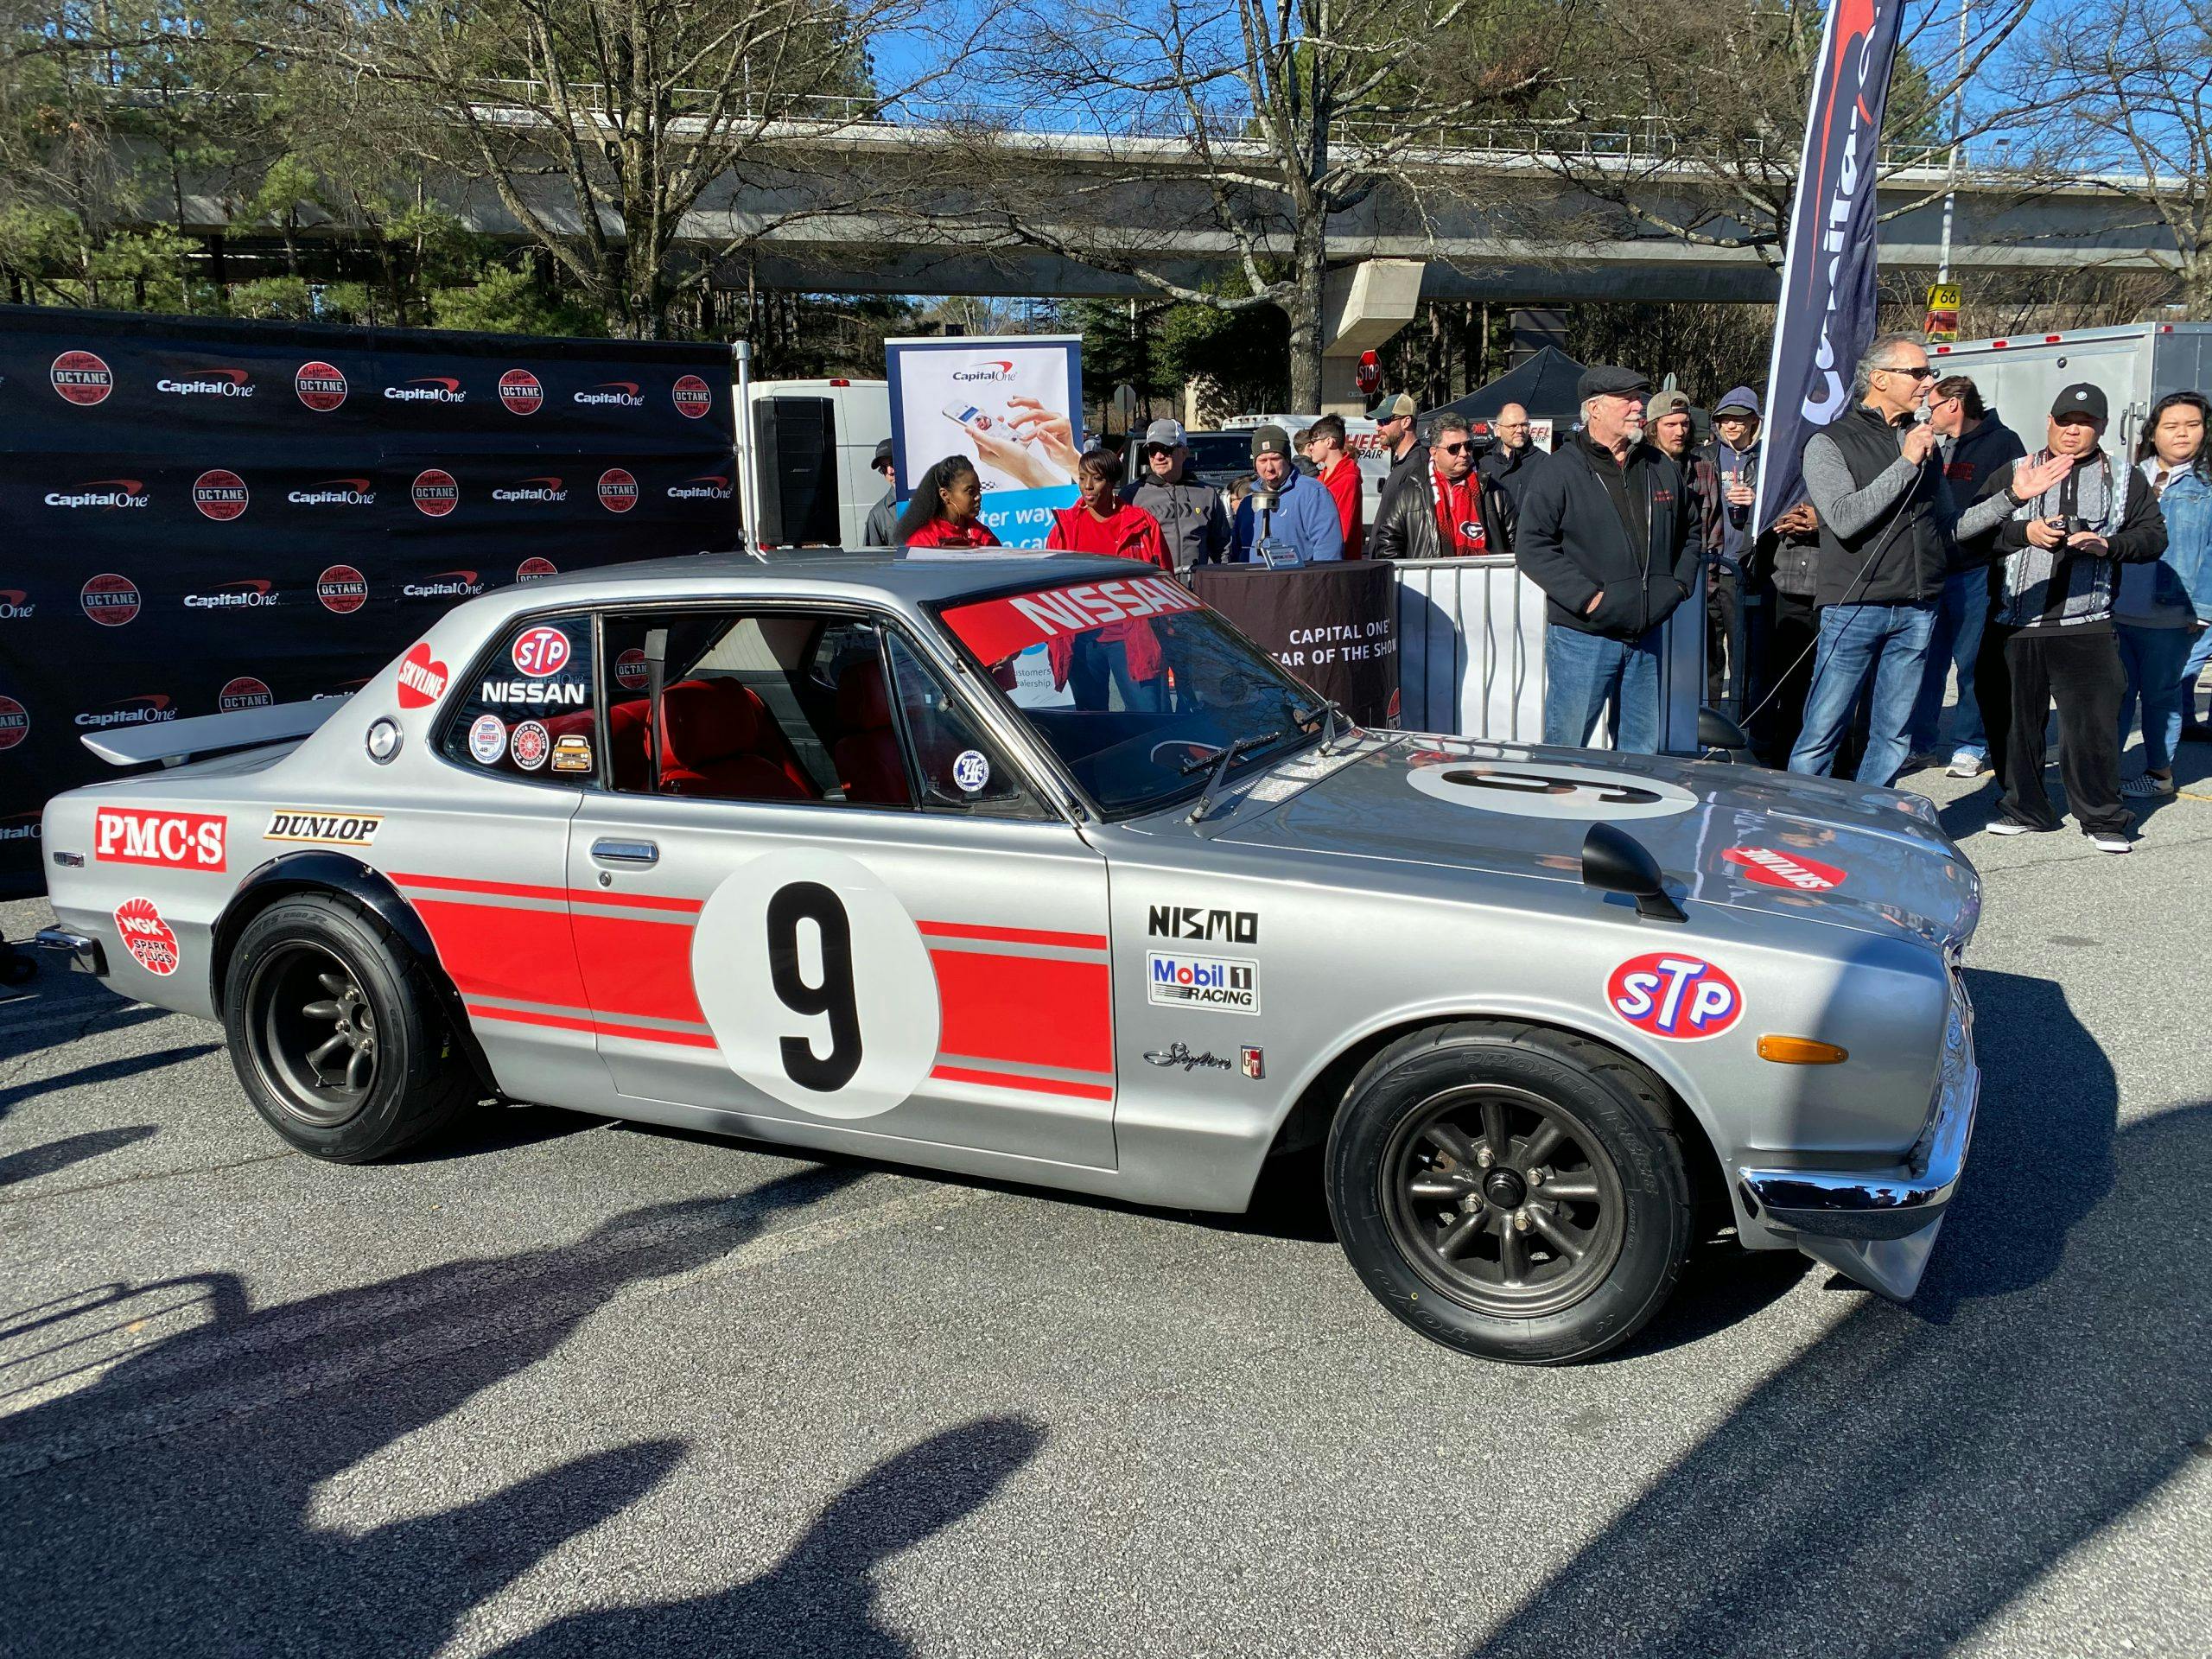 Nissan Nismo racing vehicle is showcased at Caffeine and Octane